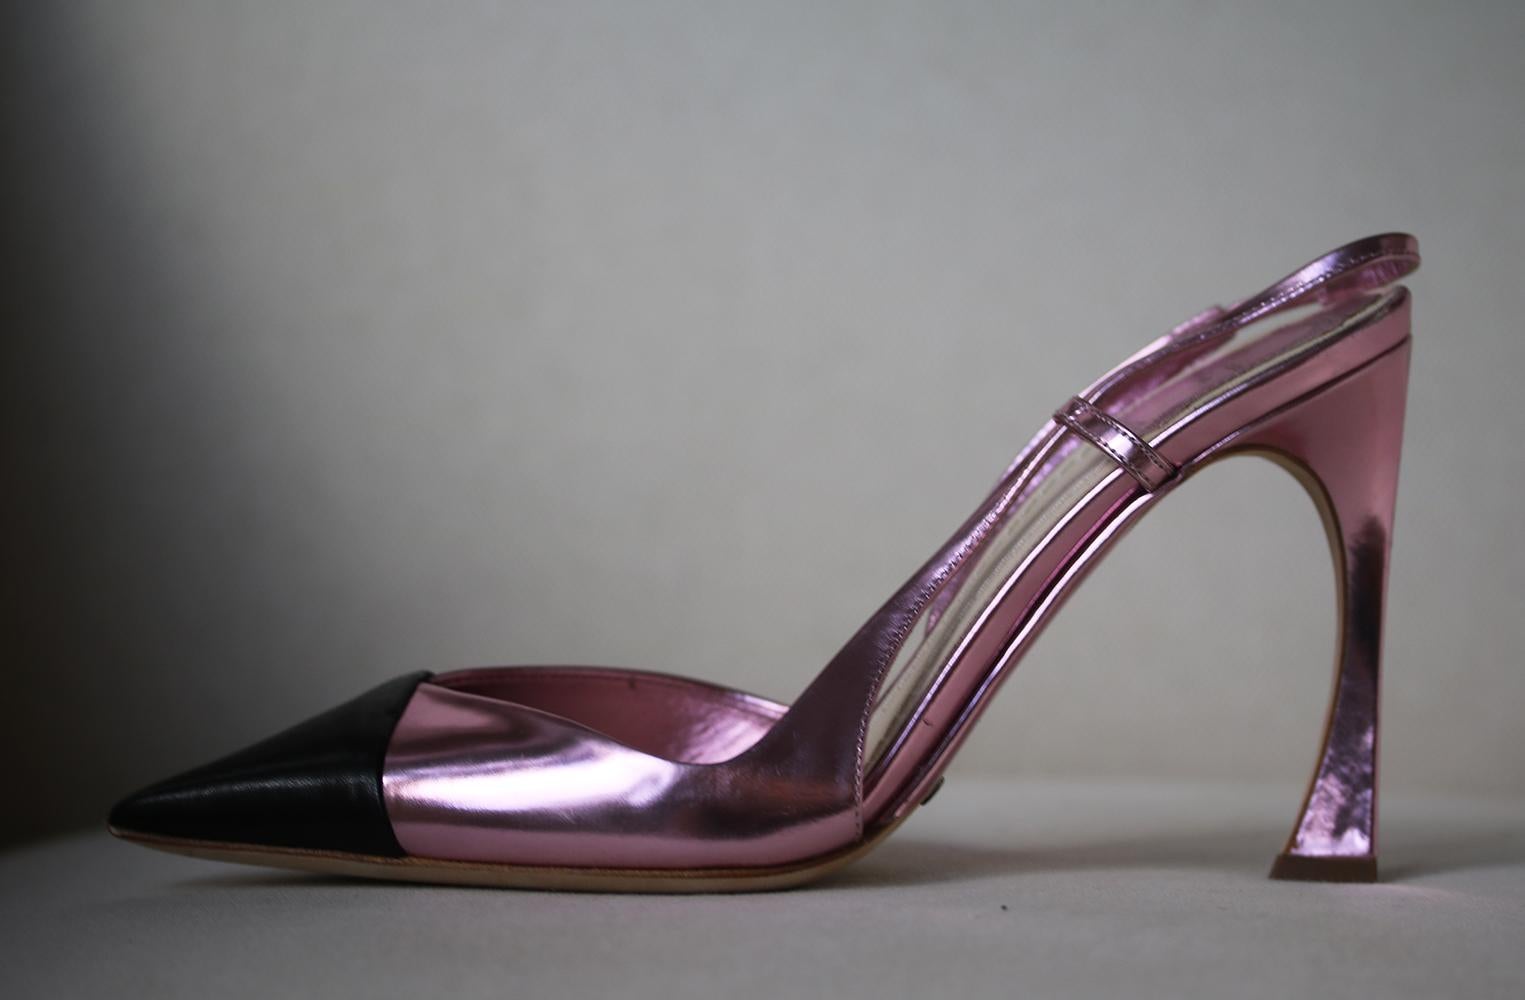 These Christian Dior metallic pink and black leather heels are for the fashion forward, featuring a high heel detail with cut-outs, a pointed-toe and a leather slingback design.

Size: EU 37 (UK 4, US 7)

Condition: New without box. 